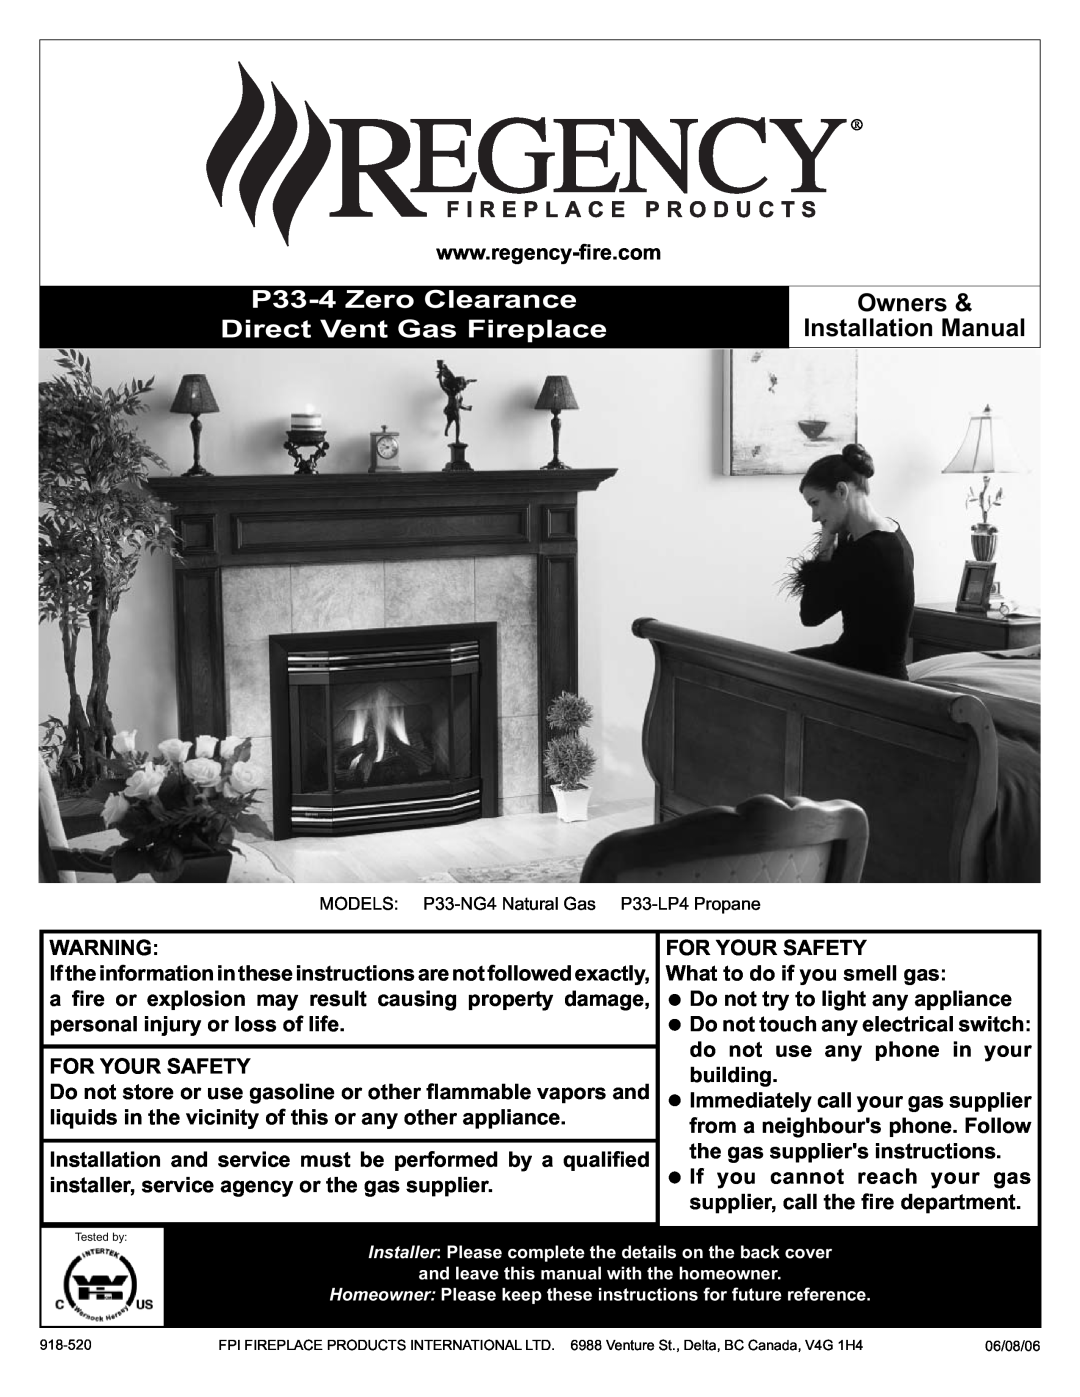 Regency P33-NG4 installation manual P33-4Zero Clearance, Direct Vent Gas Fireplace, Owners, Installation Manual 